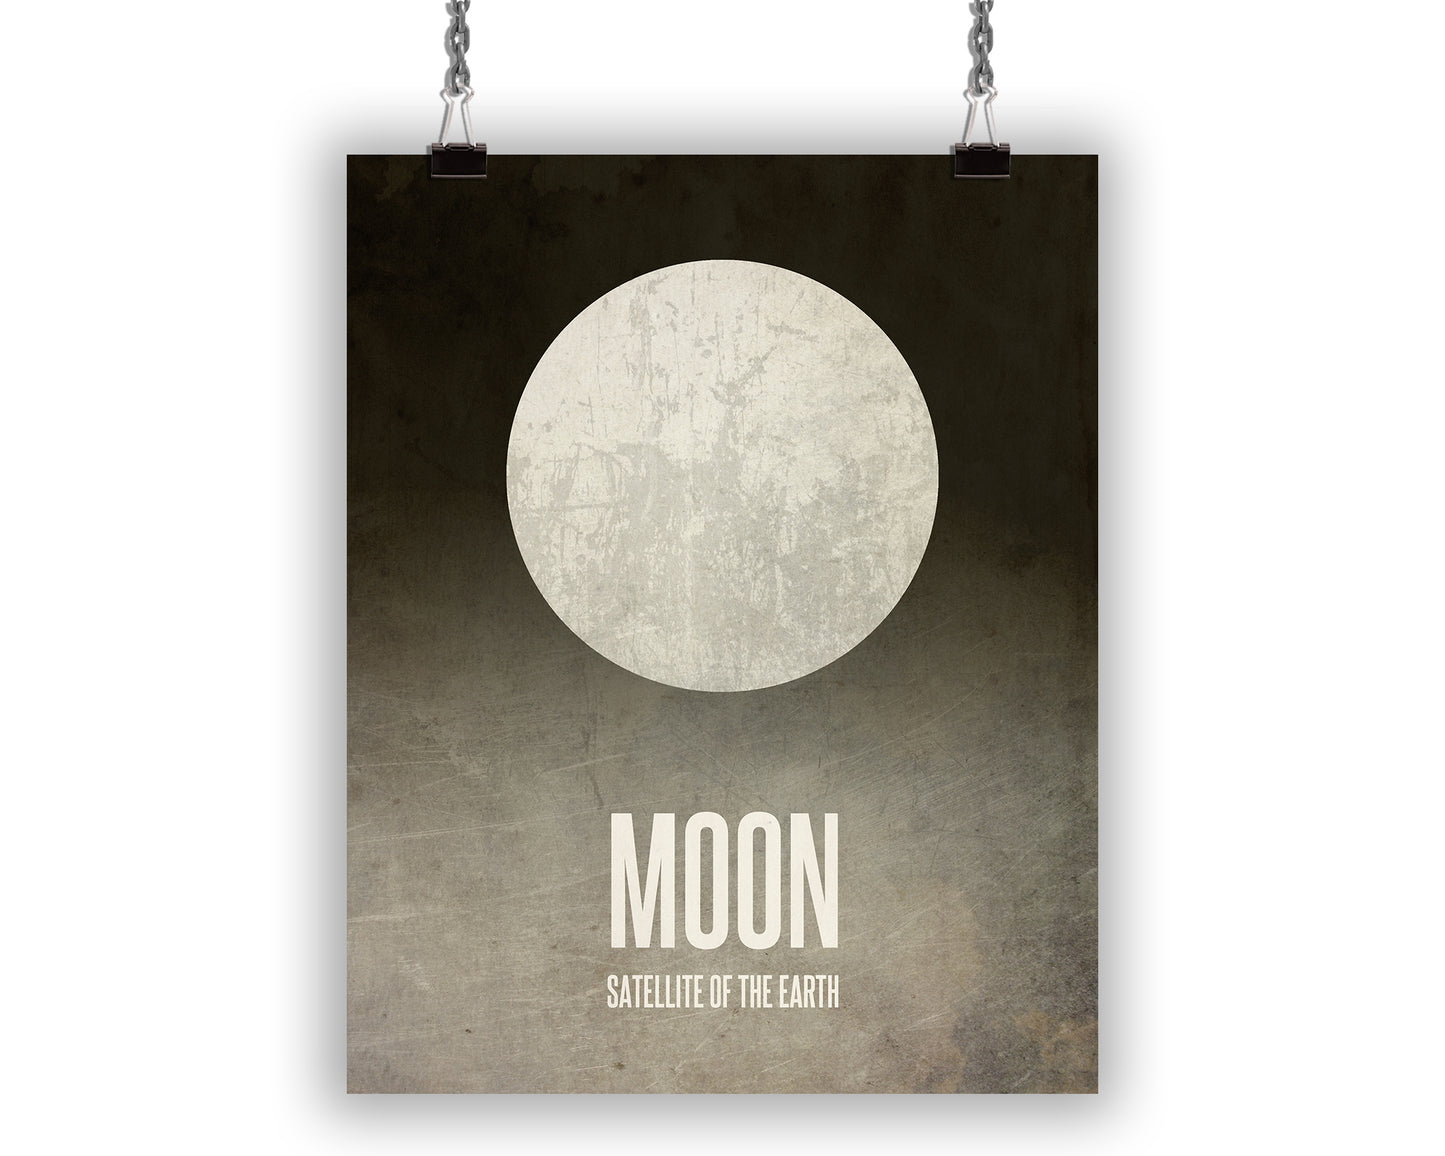 Art print with minimalist image of the moon with a textured vintage look.